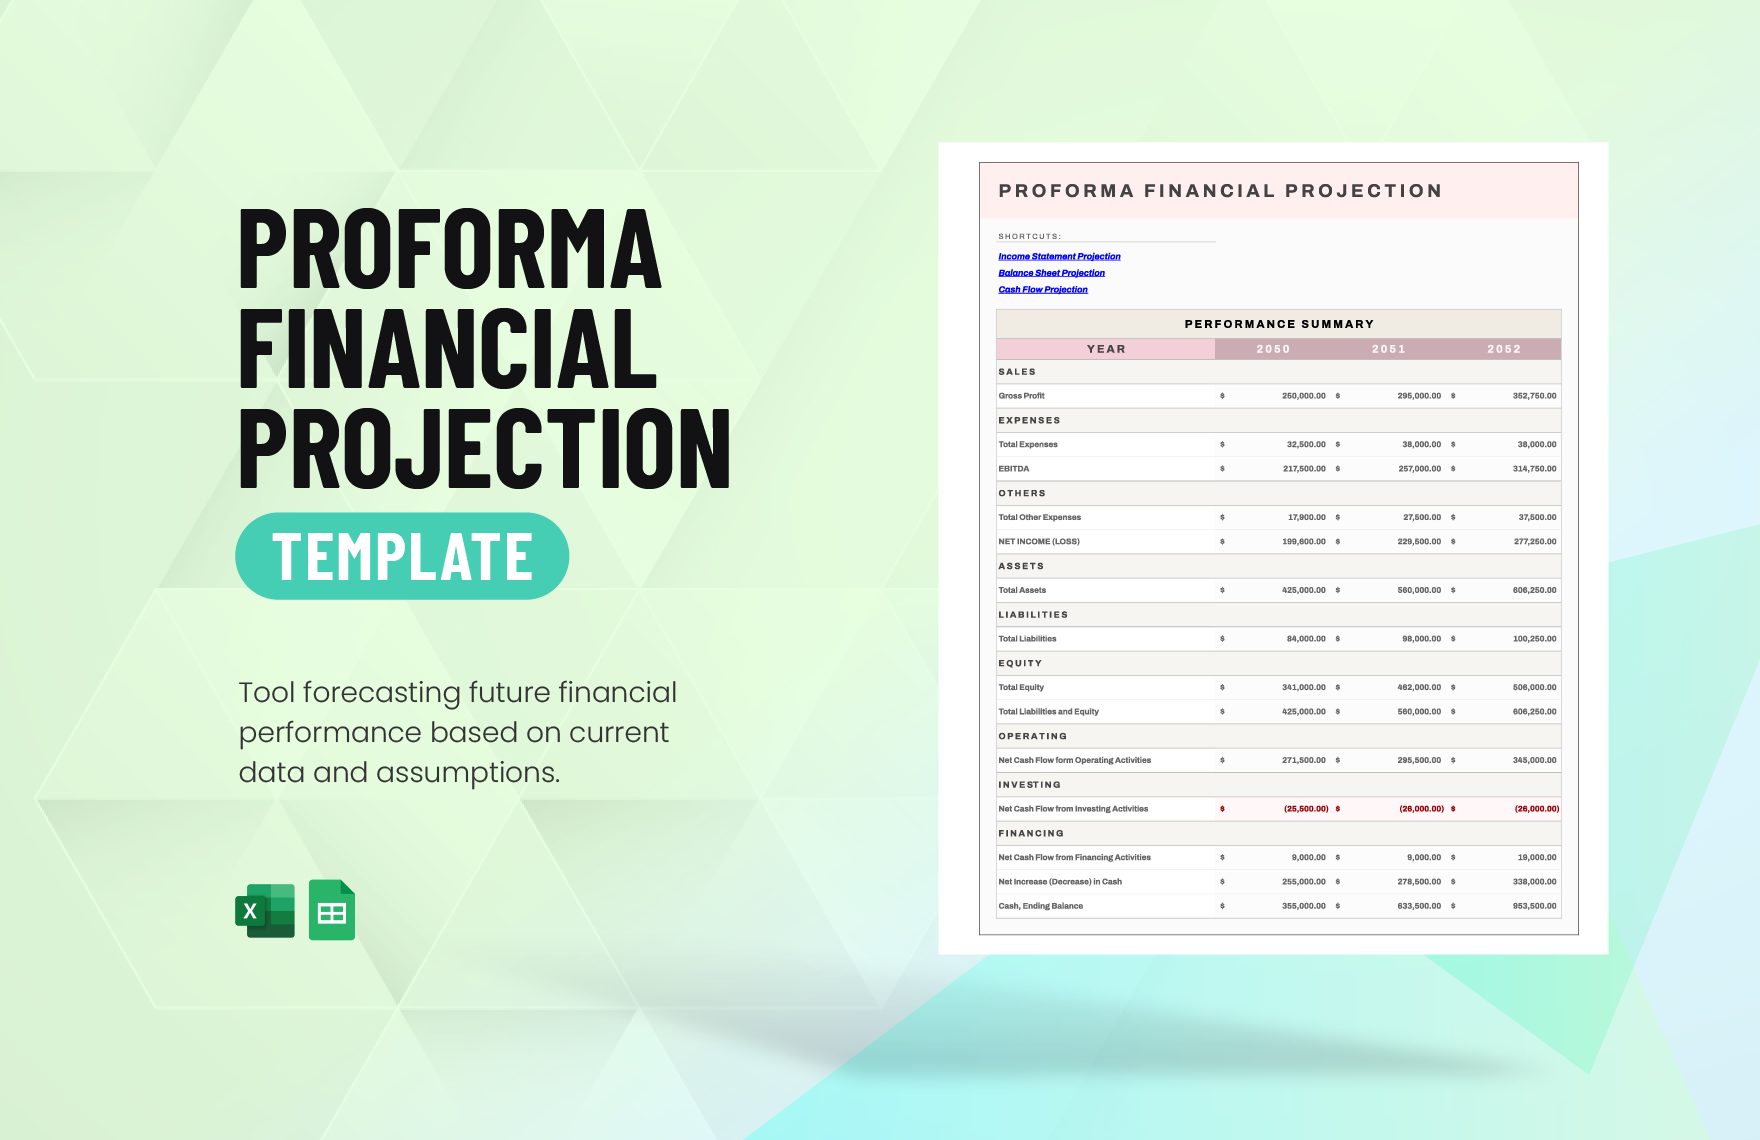 Proforma Financial Projection Template in Excel, Google Sheets